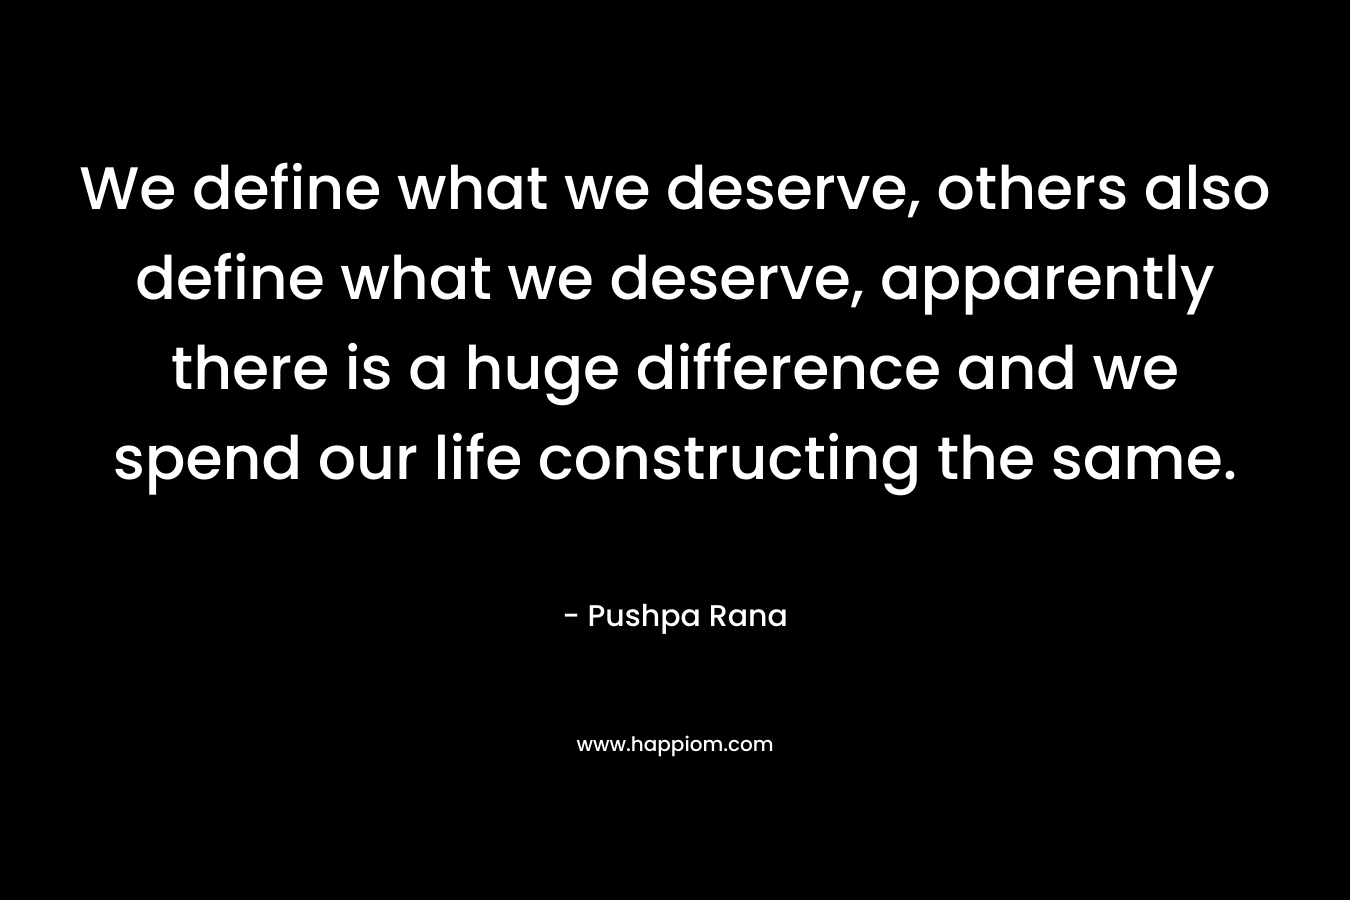 We define what we deserve, others also define what we deserve, apparently there is a huge difference and we spend our life constructing the same.